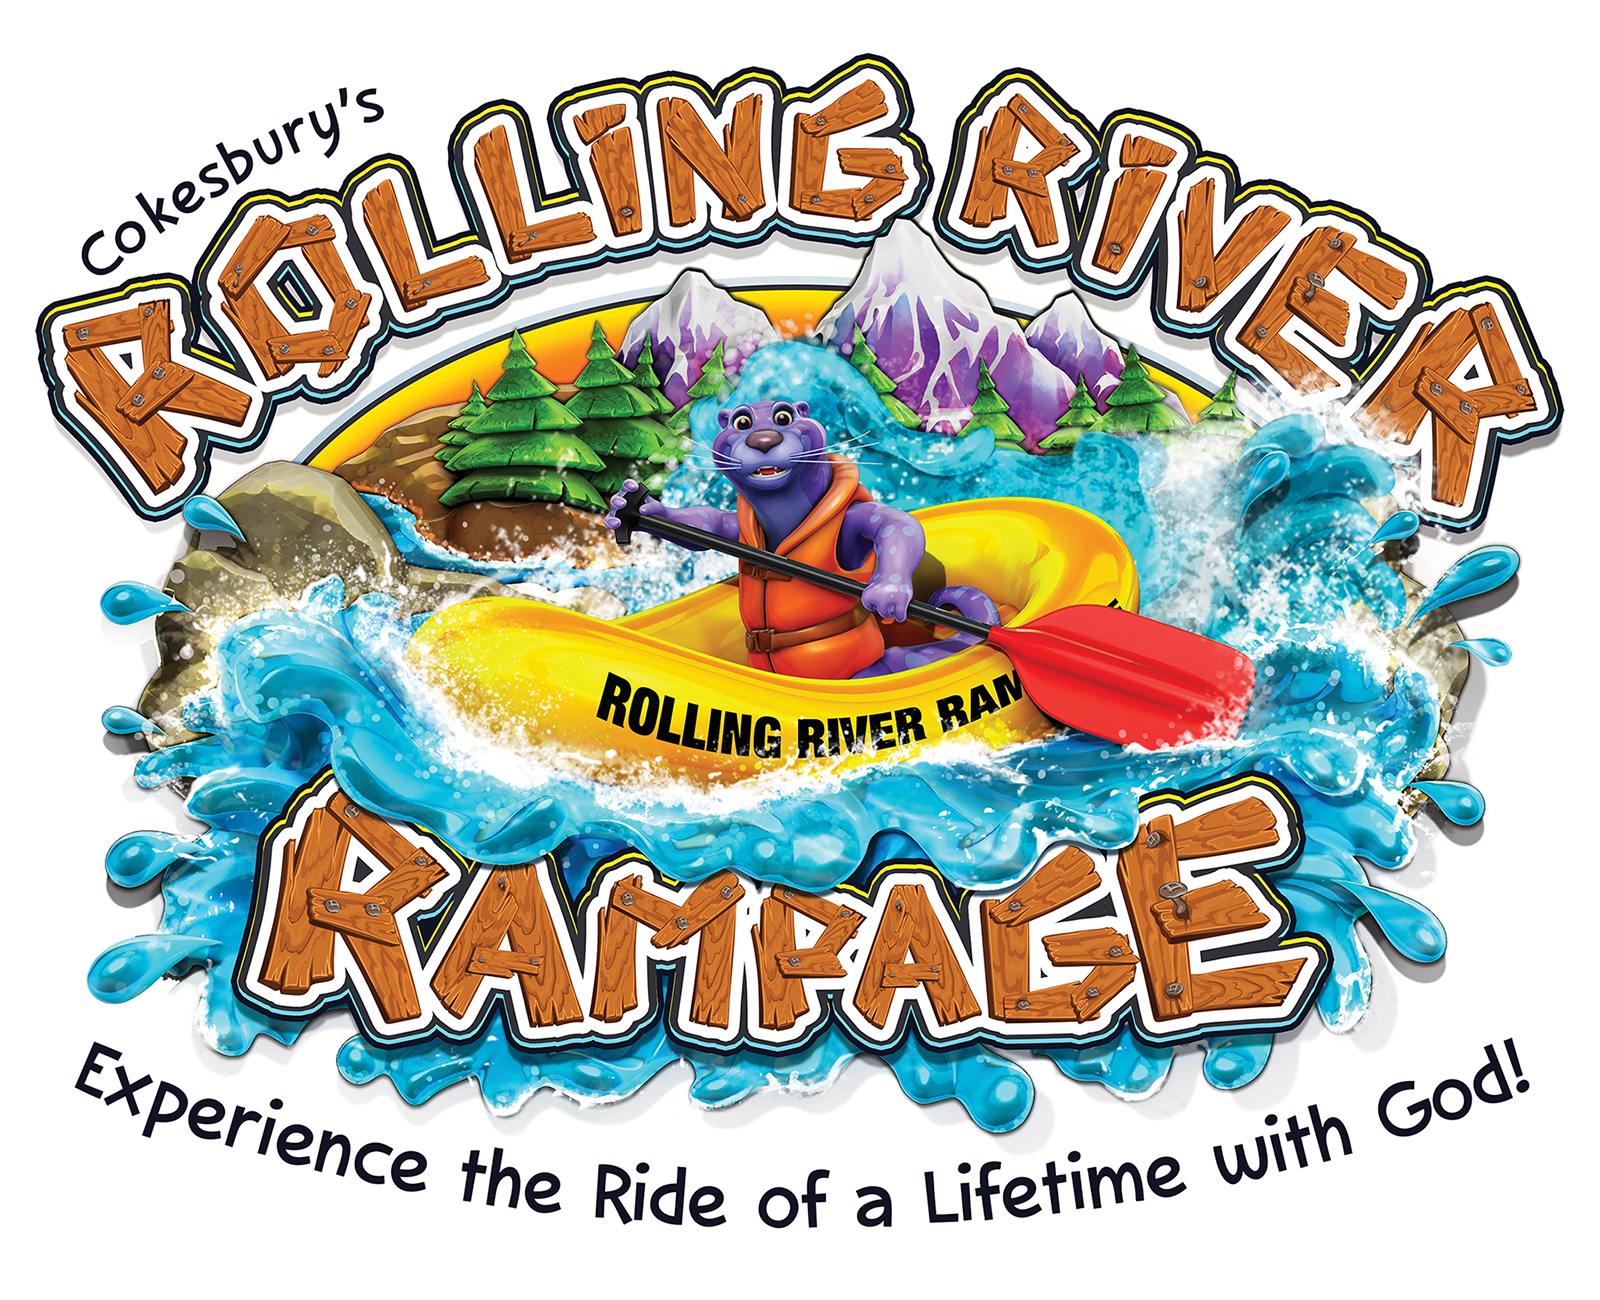 Cokesbury's Rolling River Rampage: 11 More Songs | KidTunz